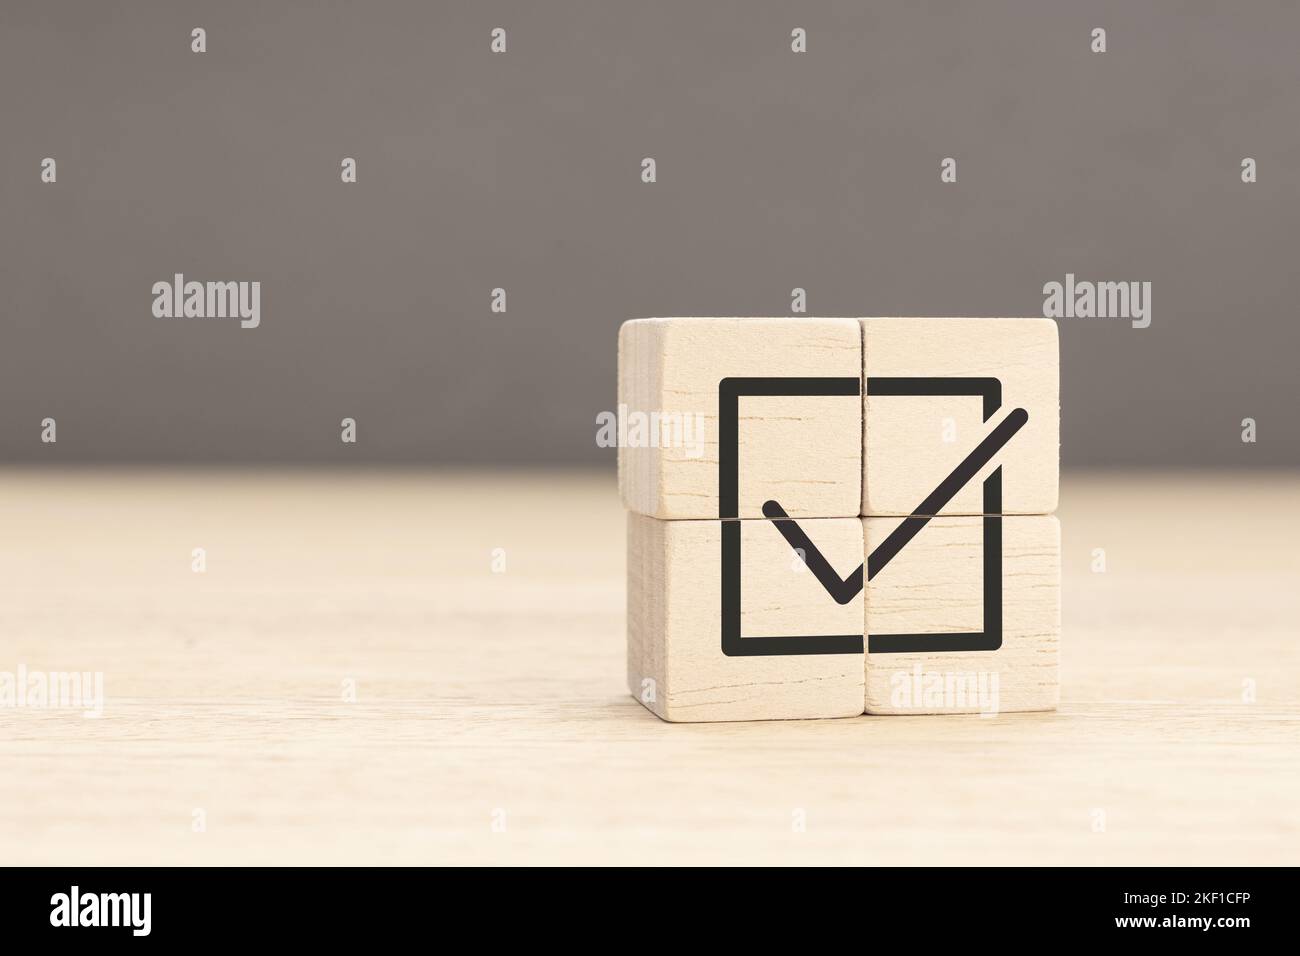 Corporate regulatory and compliance. Goals achievement and business success. Task completion. Wooden cube with check mark icon. Copy space Stock Photo